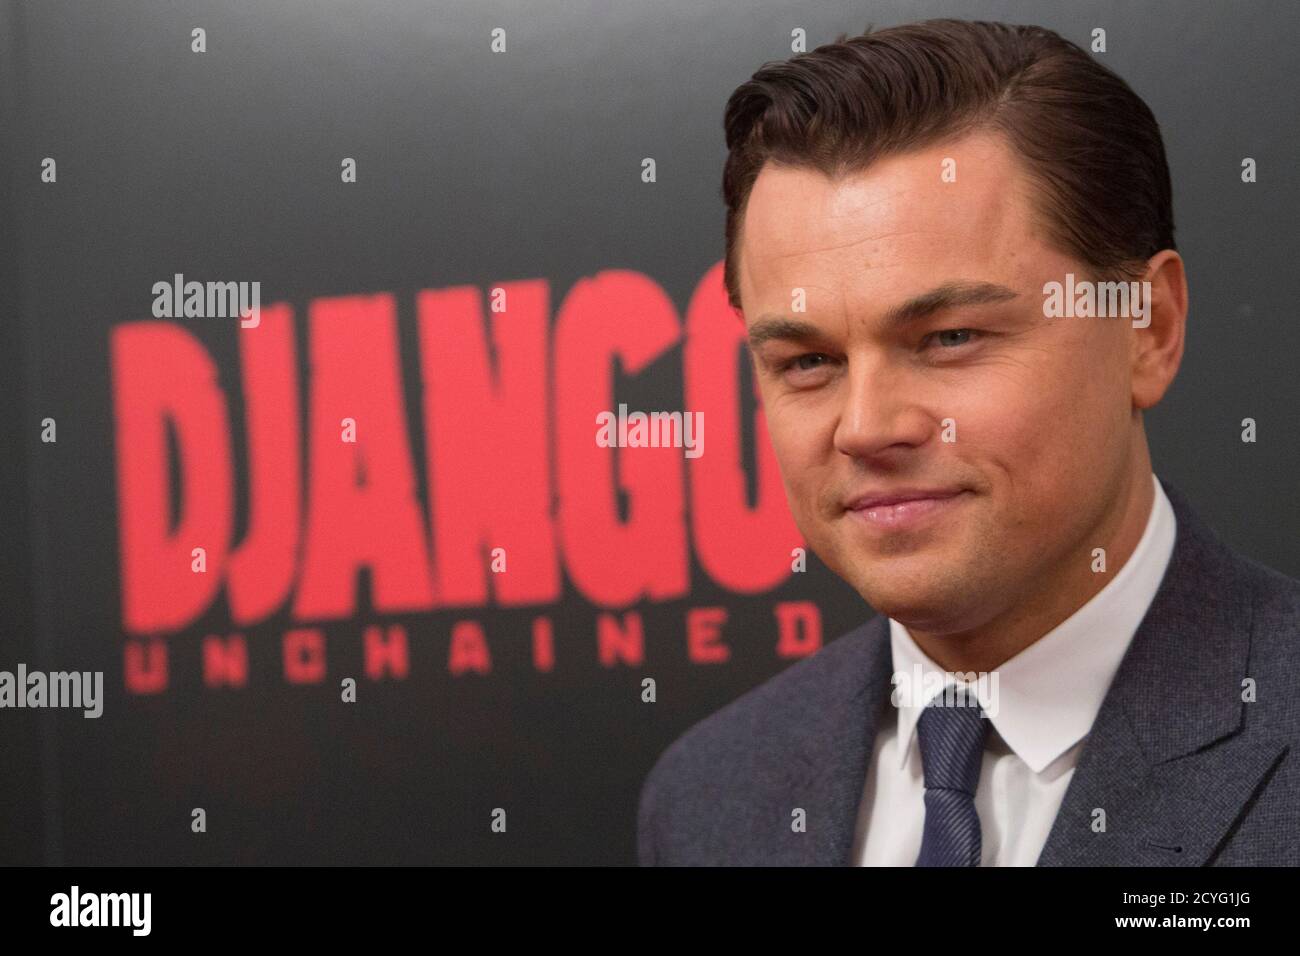 Django Unchained Leonardo Dicaprio High Resolution Stock Photography And Images Alamy